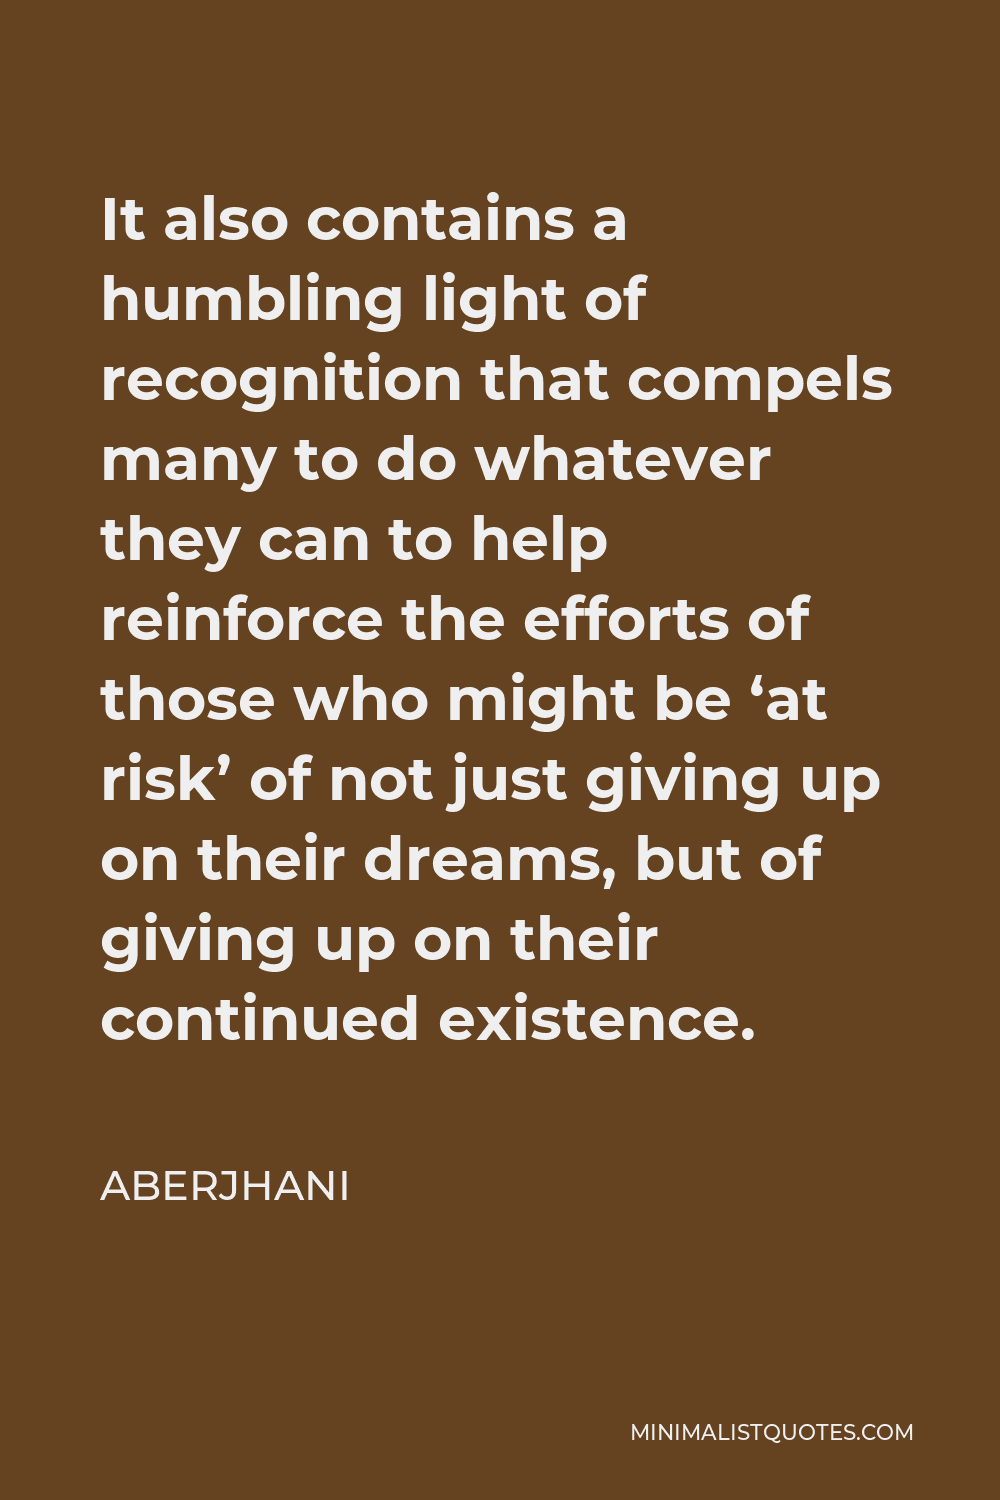 Aberjhani Quote - It also contains a humbling light of recognition that compels many to do whatever they can to help reinforce the efforts of those who might be ‘at risk’ of not just giving up on their dreams, but of giving up on their continued existence.